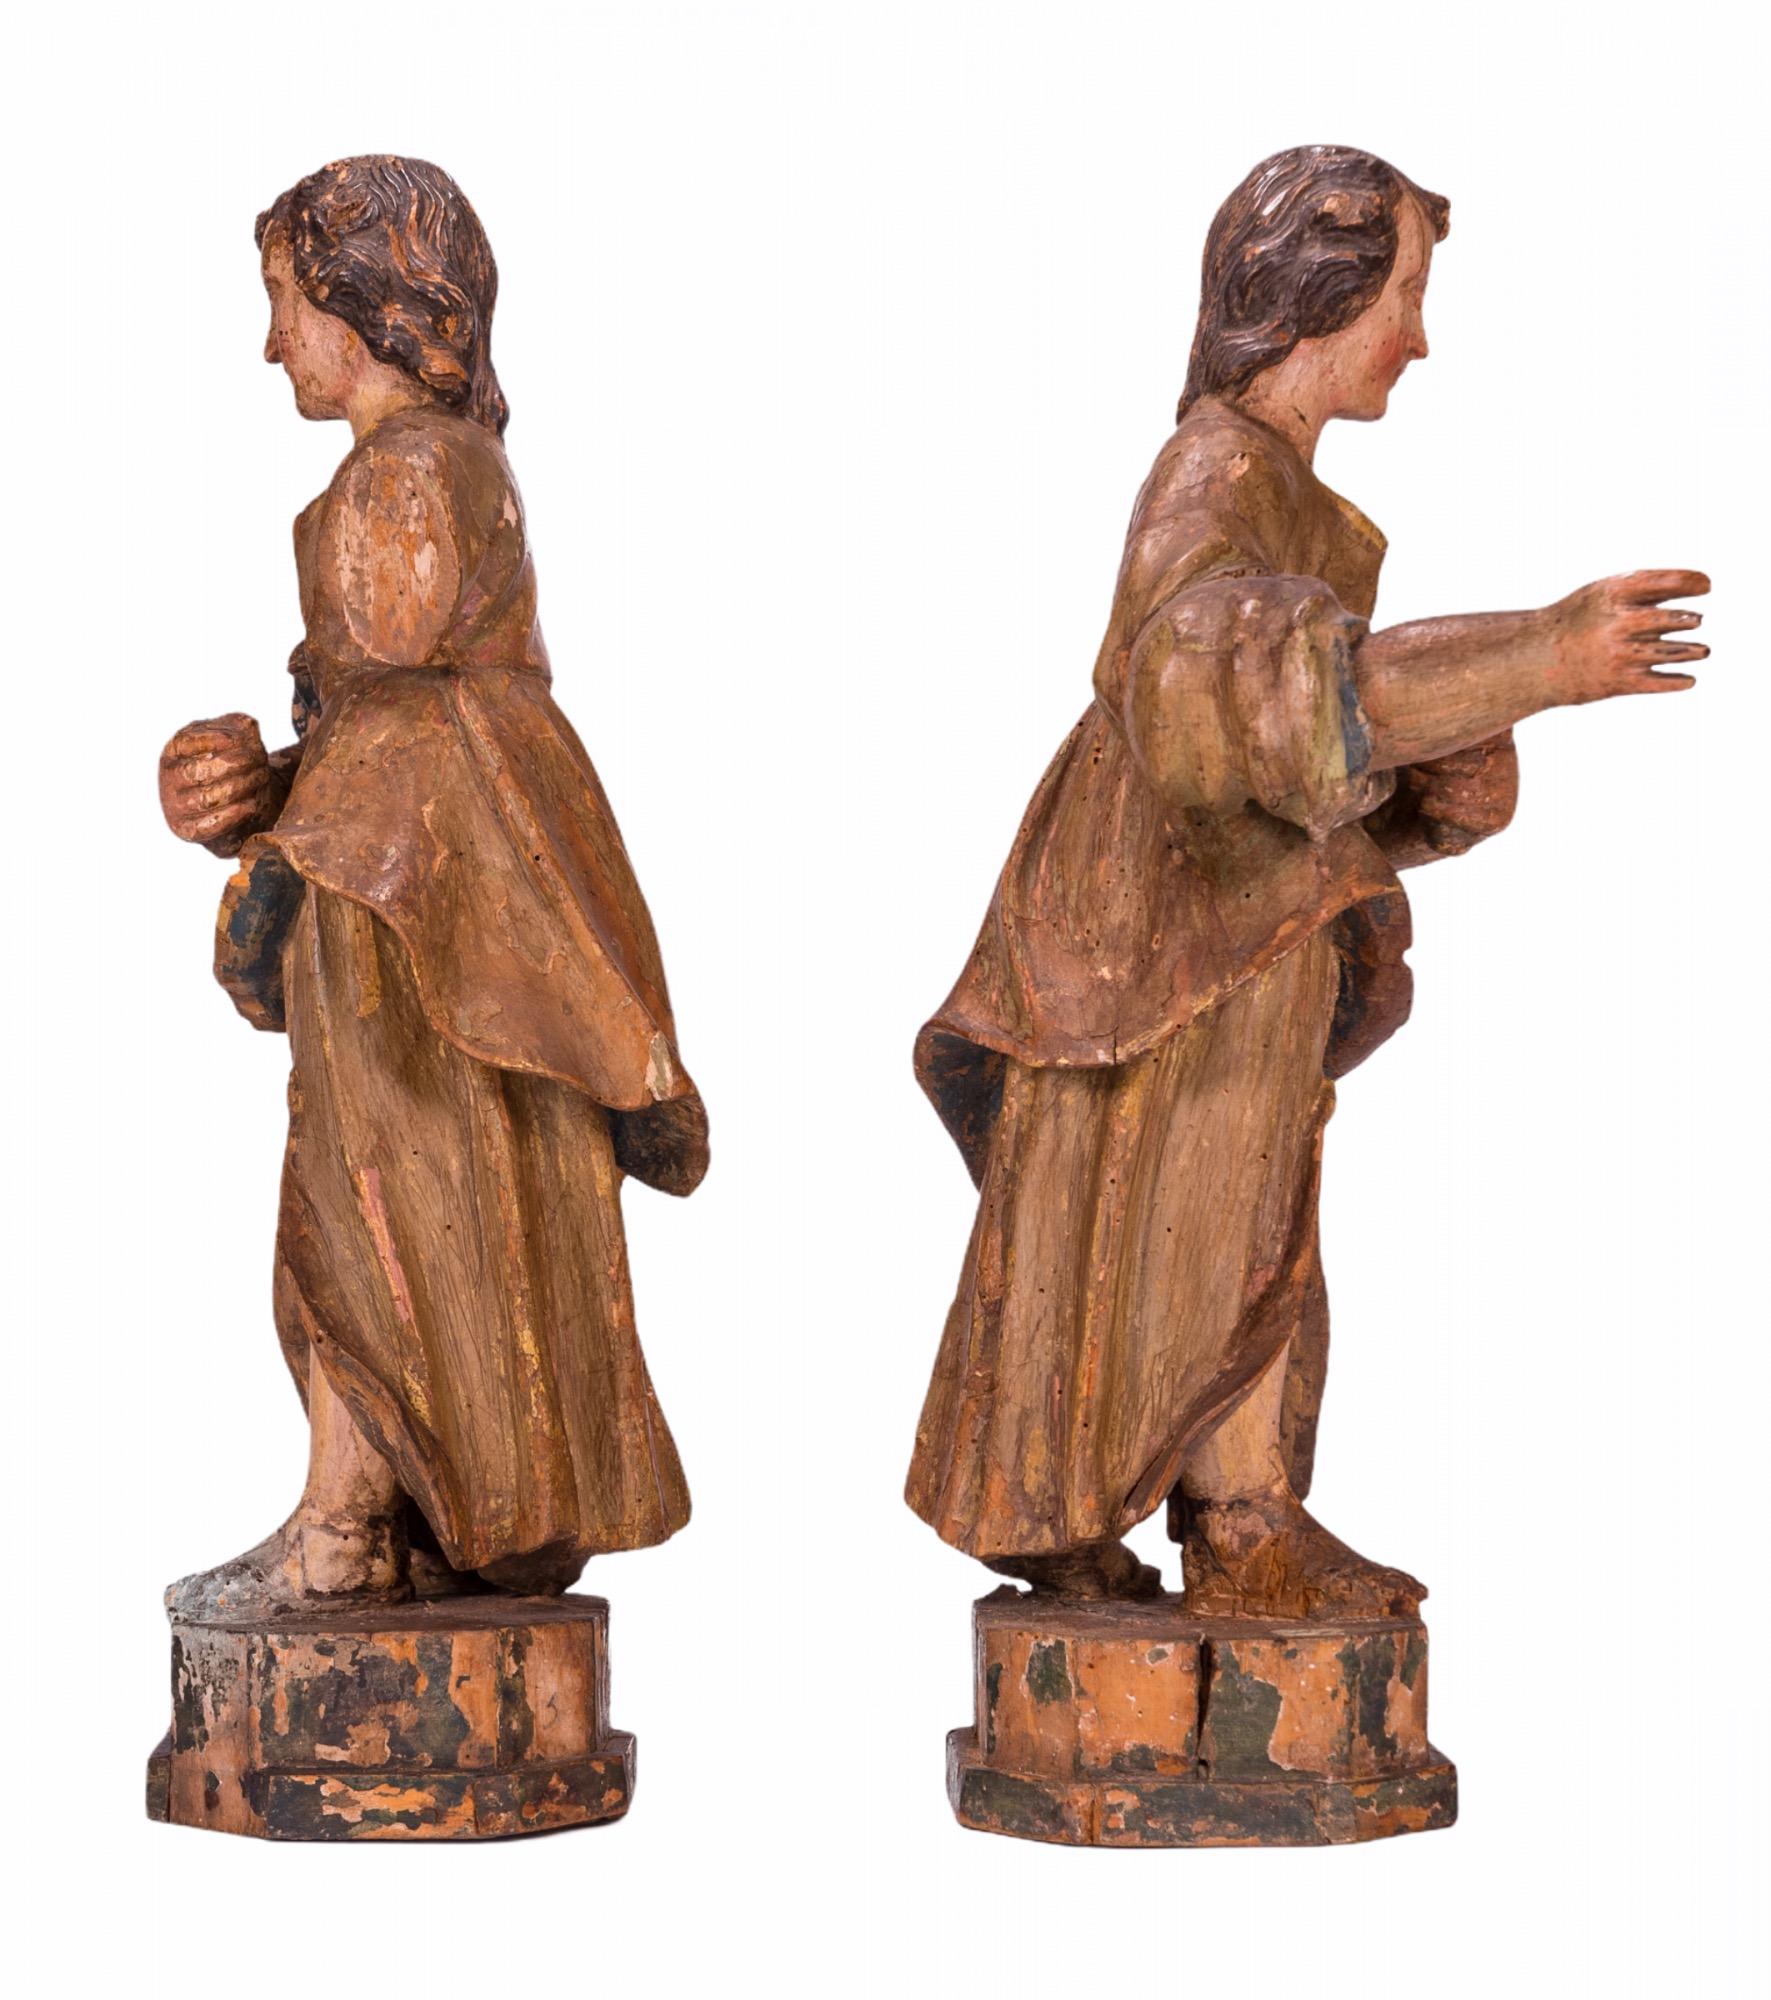 Renaissance Angelic Carved Wood Sculptures, 16th Century For Sale